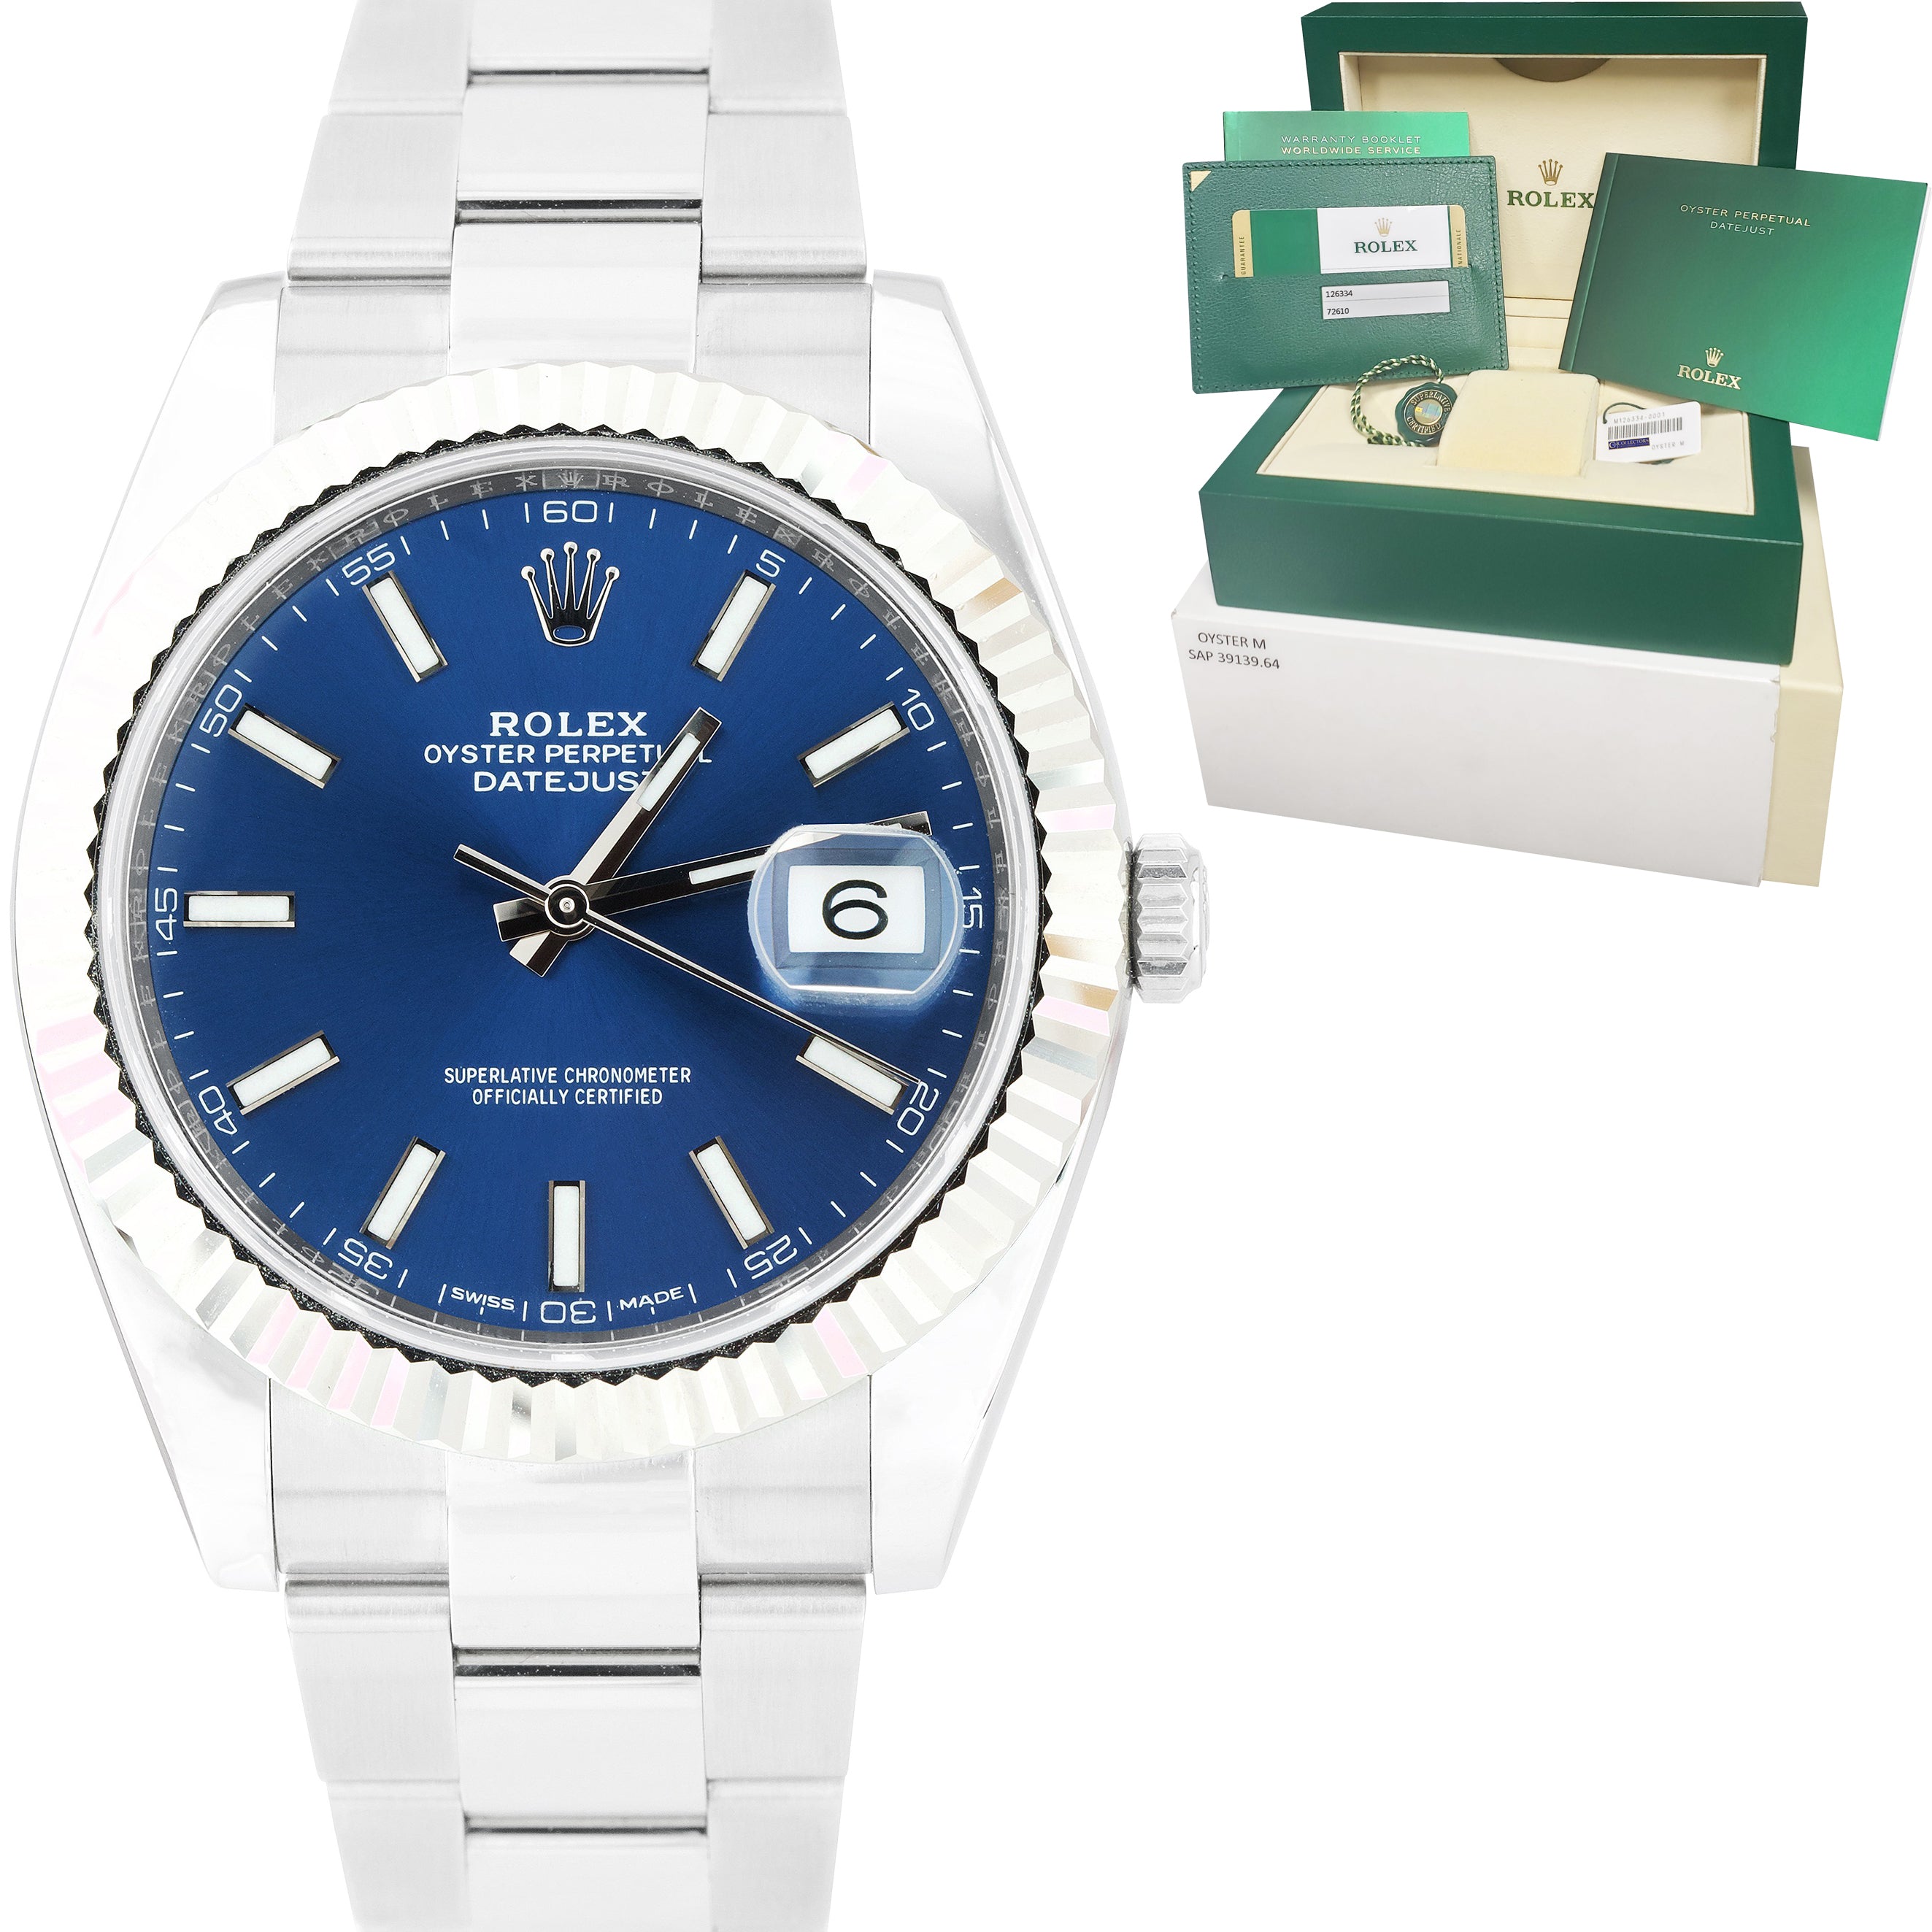 BRAND NEW Rolex DateJust 41 Blue Stainless Steel Fluted Oyster Watch 126334 B+P